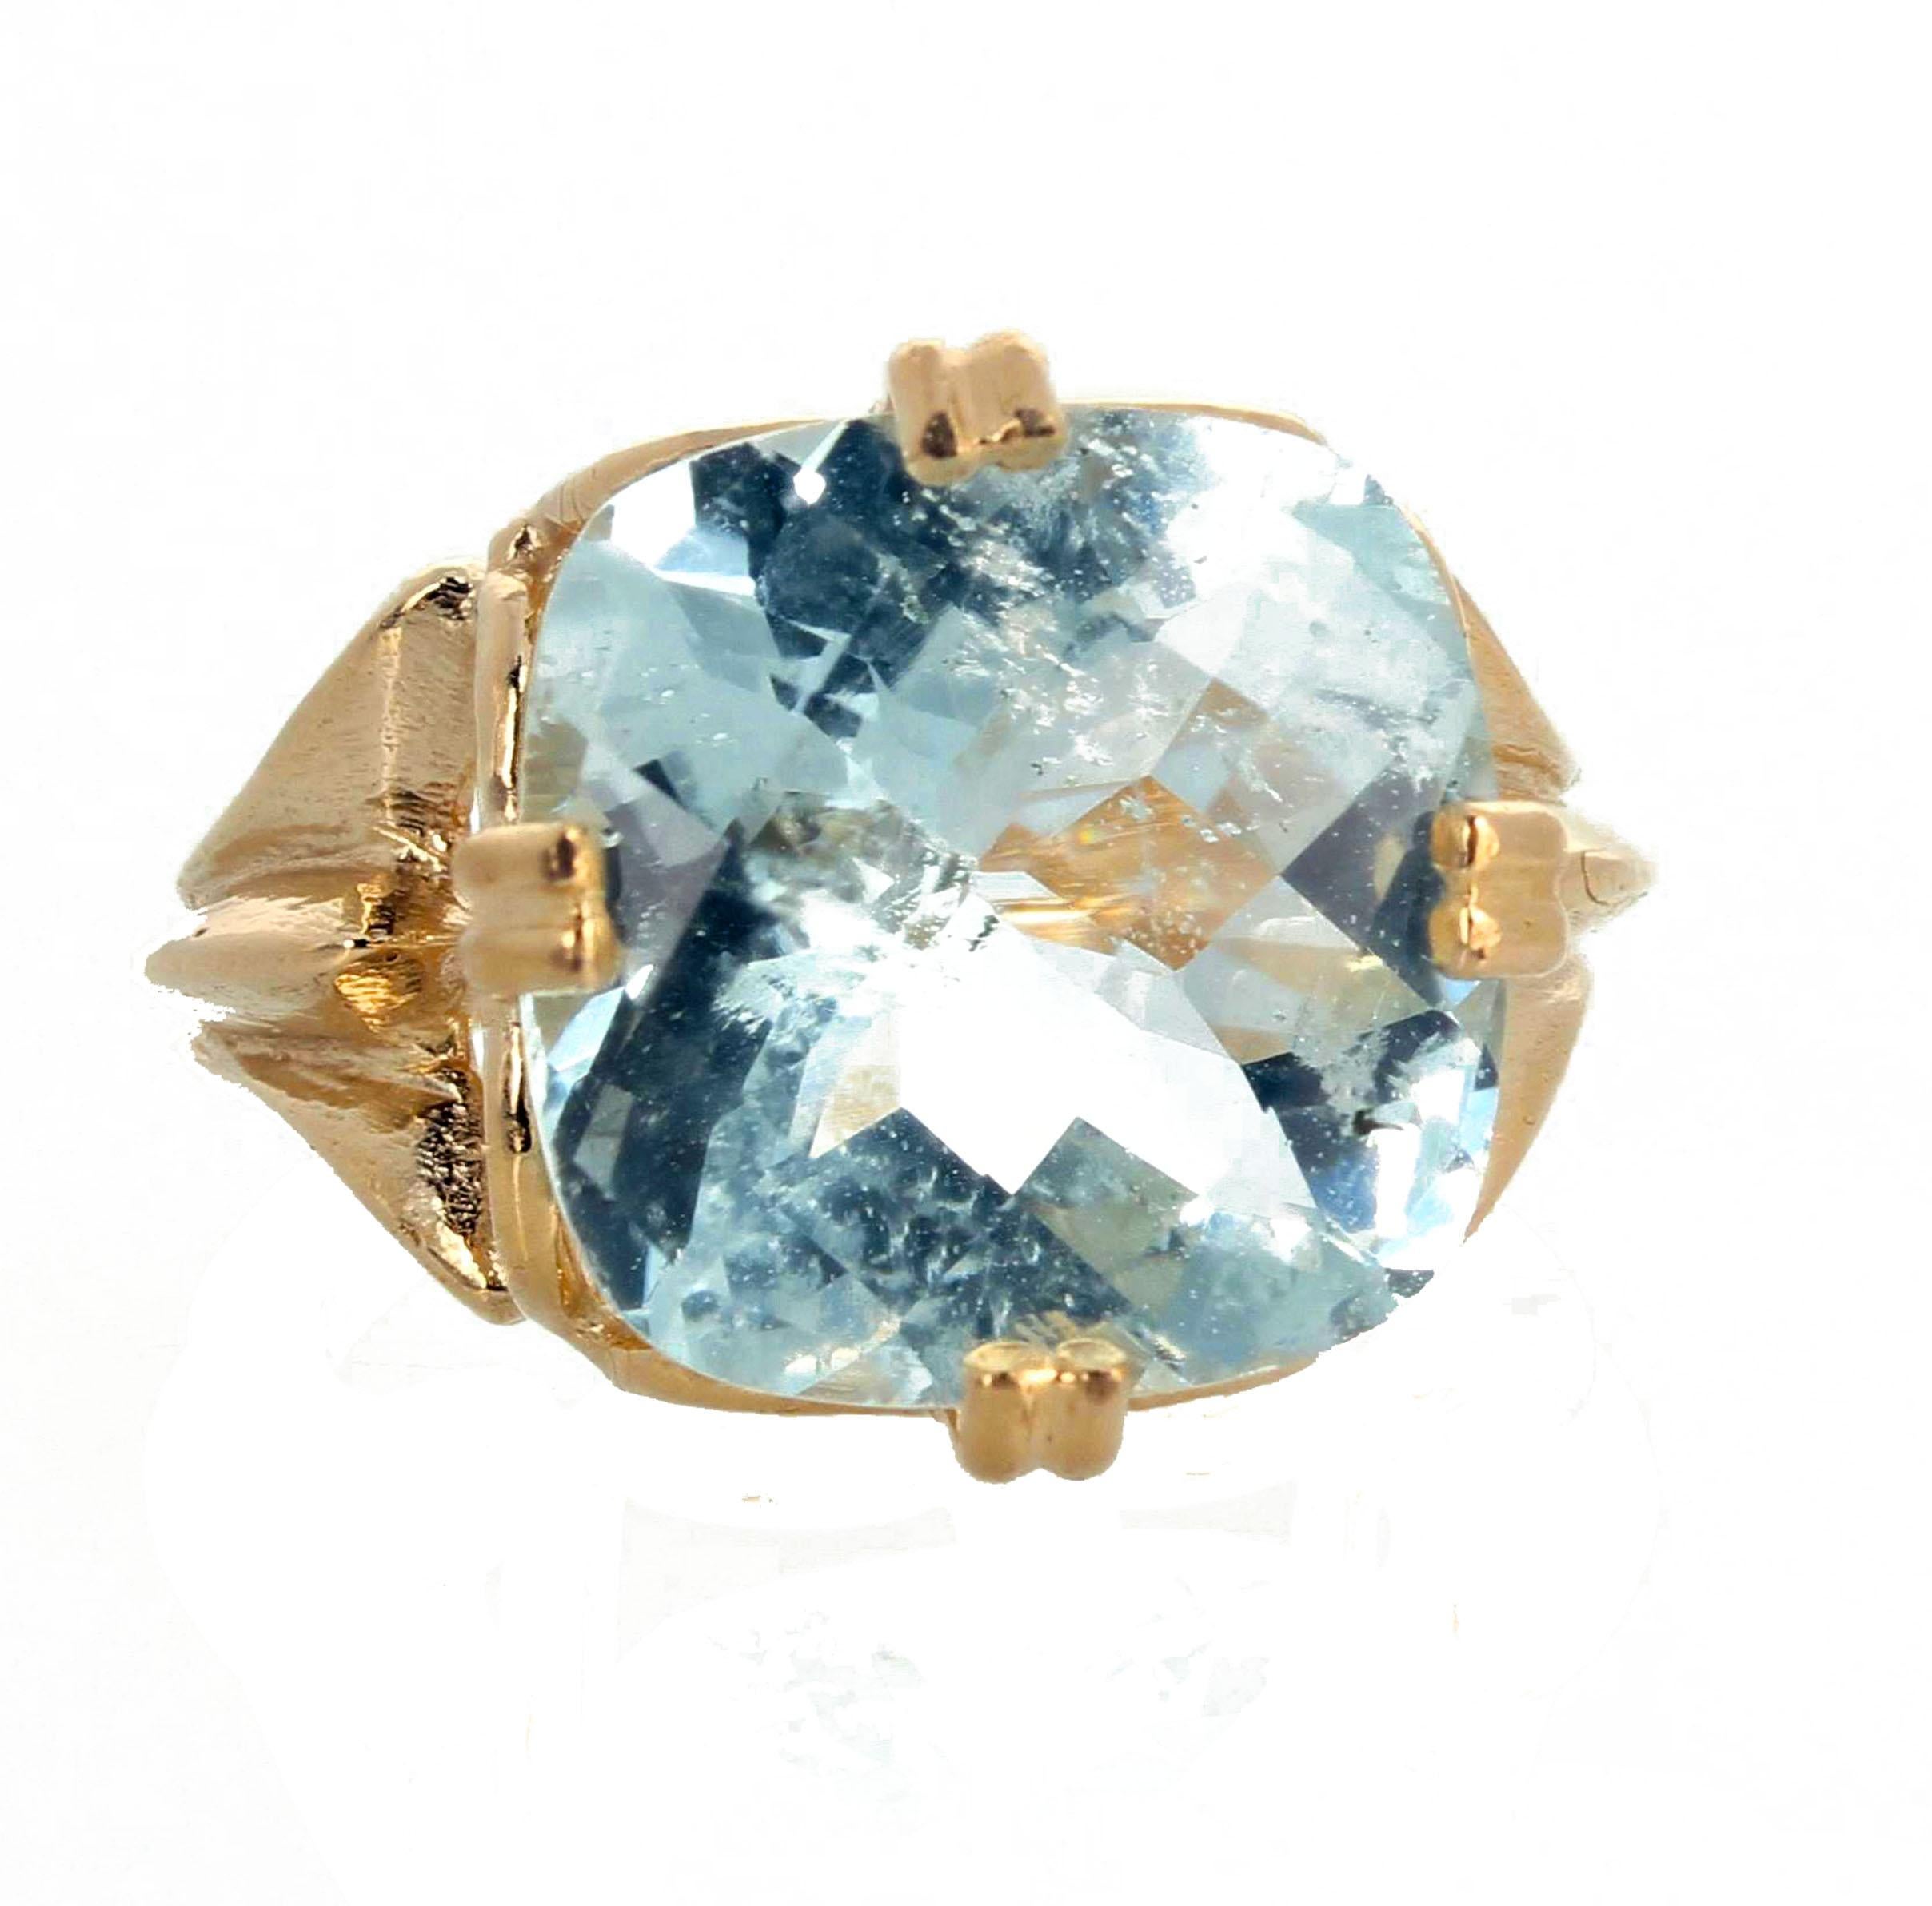 This beautiful elegant sparkling Aquamarine (14mm x 14mm) set in a timeless 14K yellow gold ring is checkerboard cut and has no eye visible inclusions.  This dazzling Aquamarine ring makes the perfect gift for that special person in your life !  